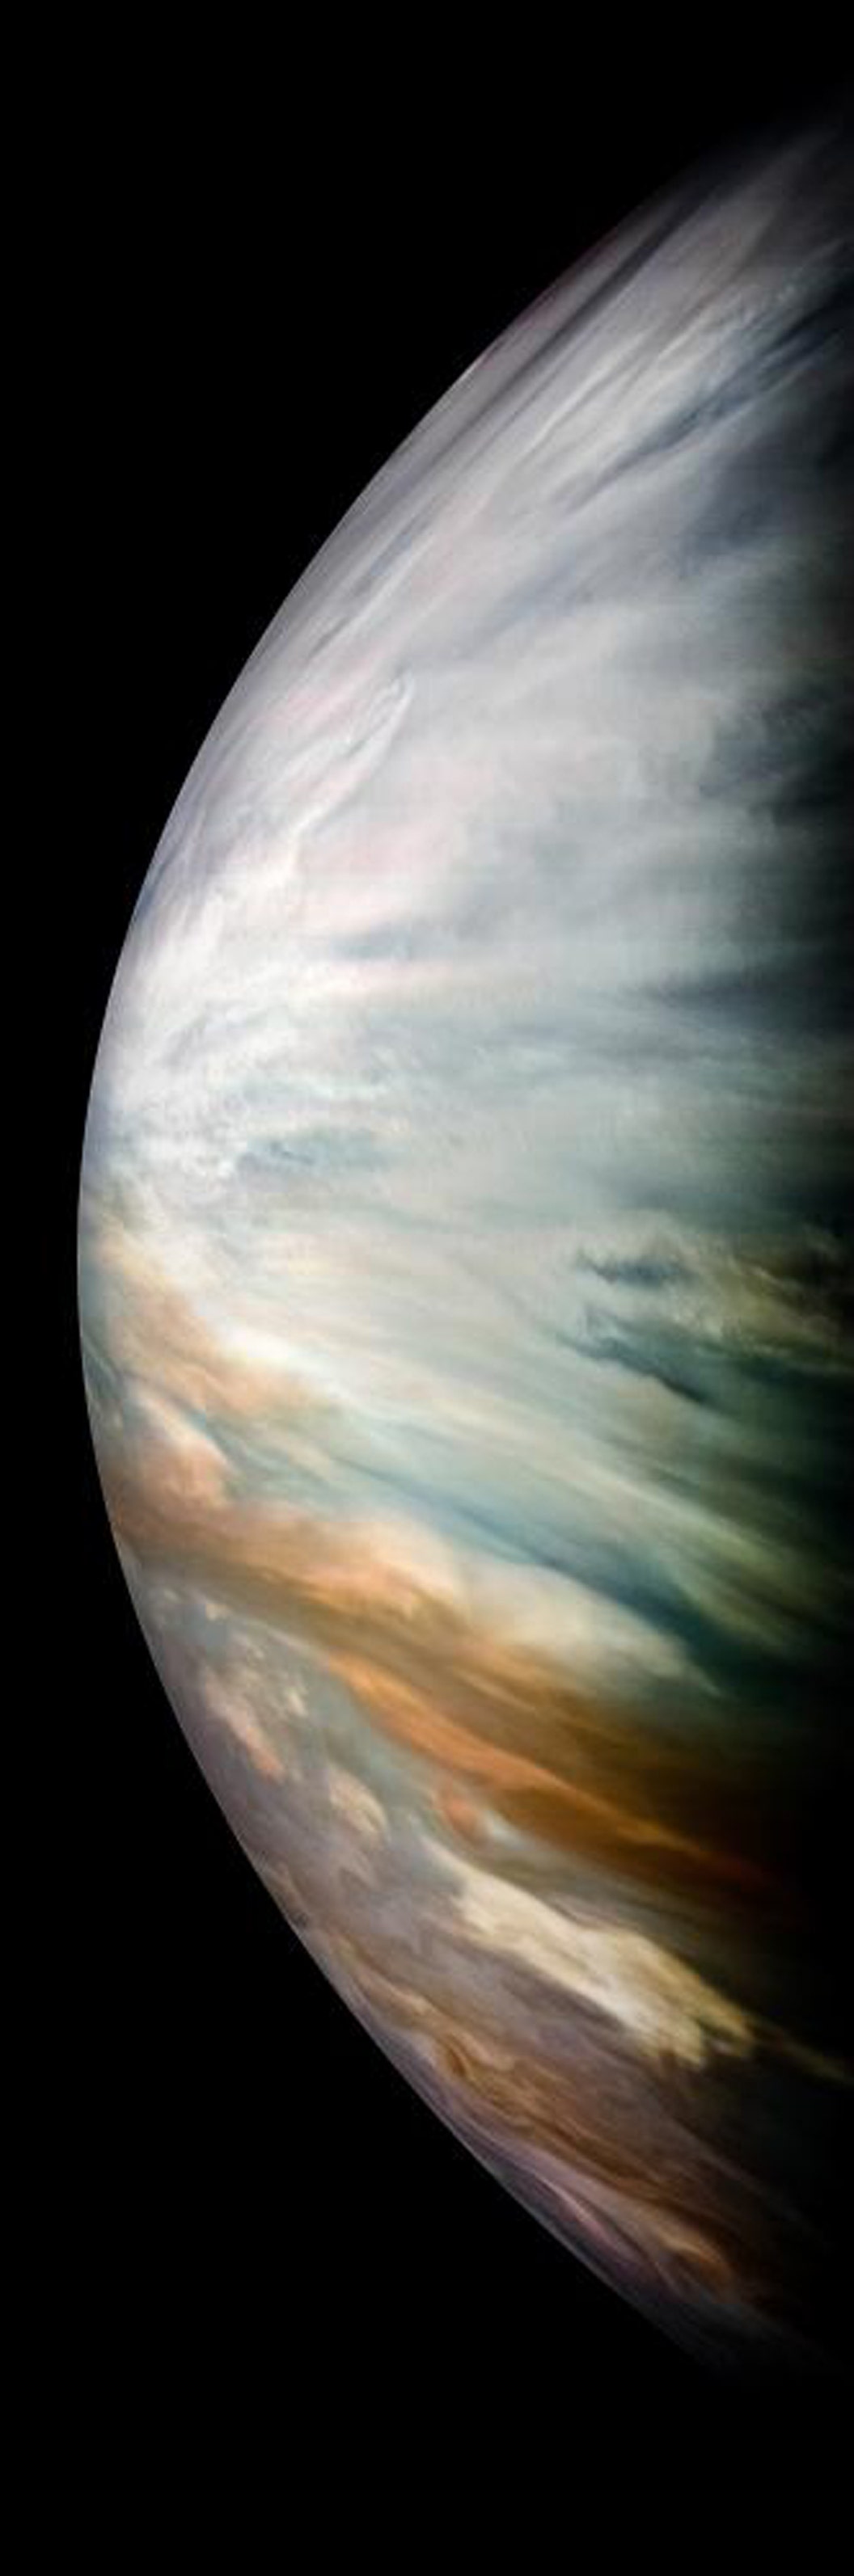 Water spotted in Jupiter's atmosphere - Fox News